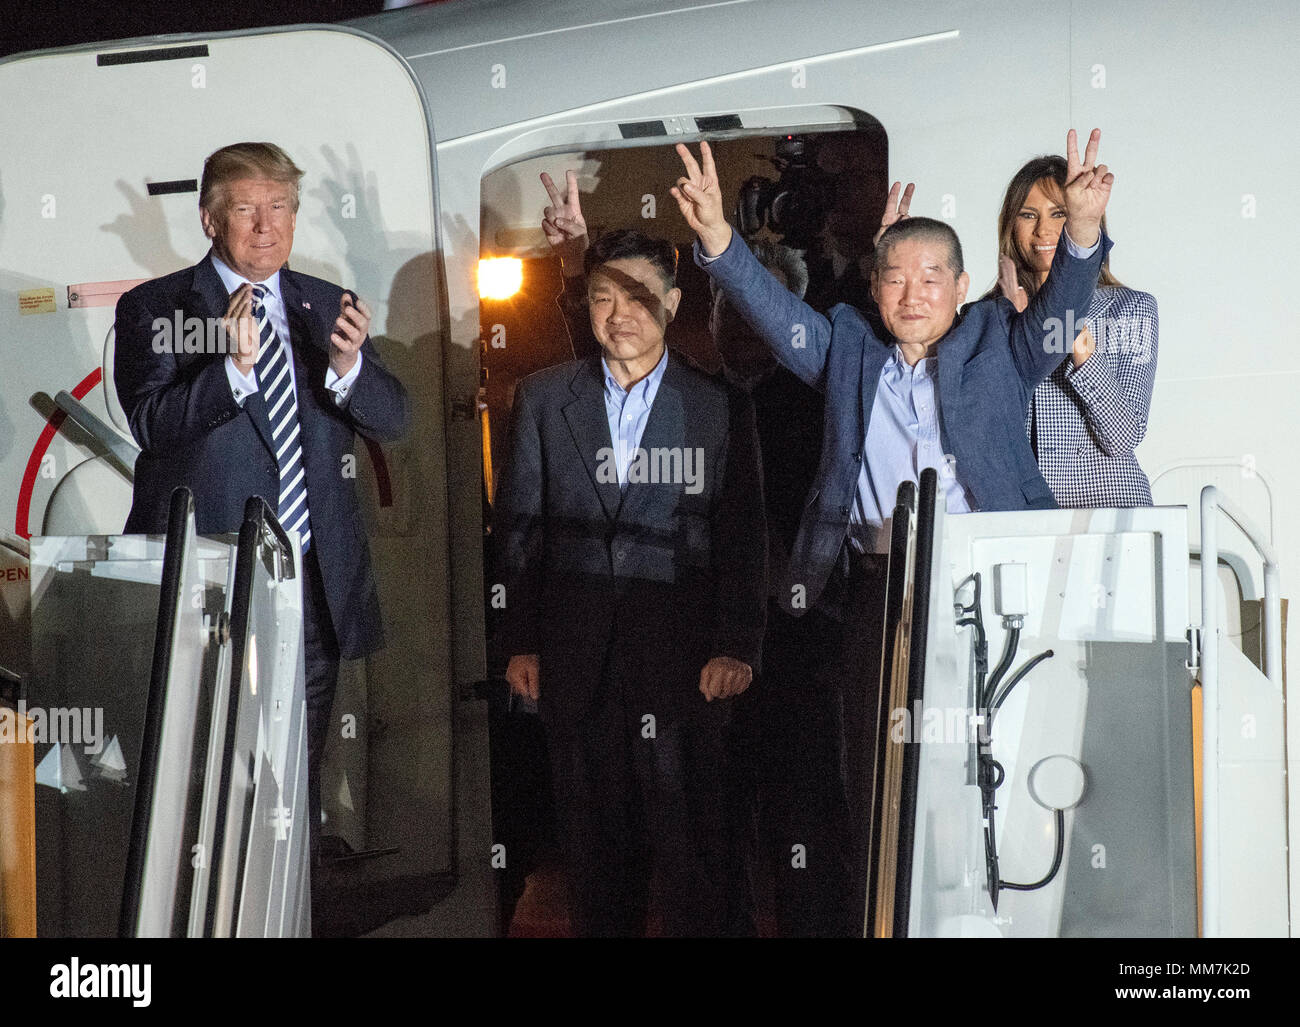 Joint Base Andrews, Maryland, USA. 10th May, 2018. United States President Donald J. Trump welcomes Kim Dong Chul, Kim Hak Song and Tony Kim back to the US at Joint Base Andrews in Maryland on Thursday, May 10, 2018. The three men were imprisoned in North Korea for periods ranging from one and two years. Credit: dpa picture alliance/Alamy Live News Stock Photo